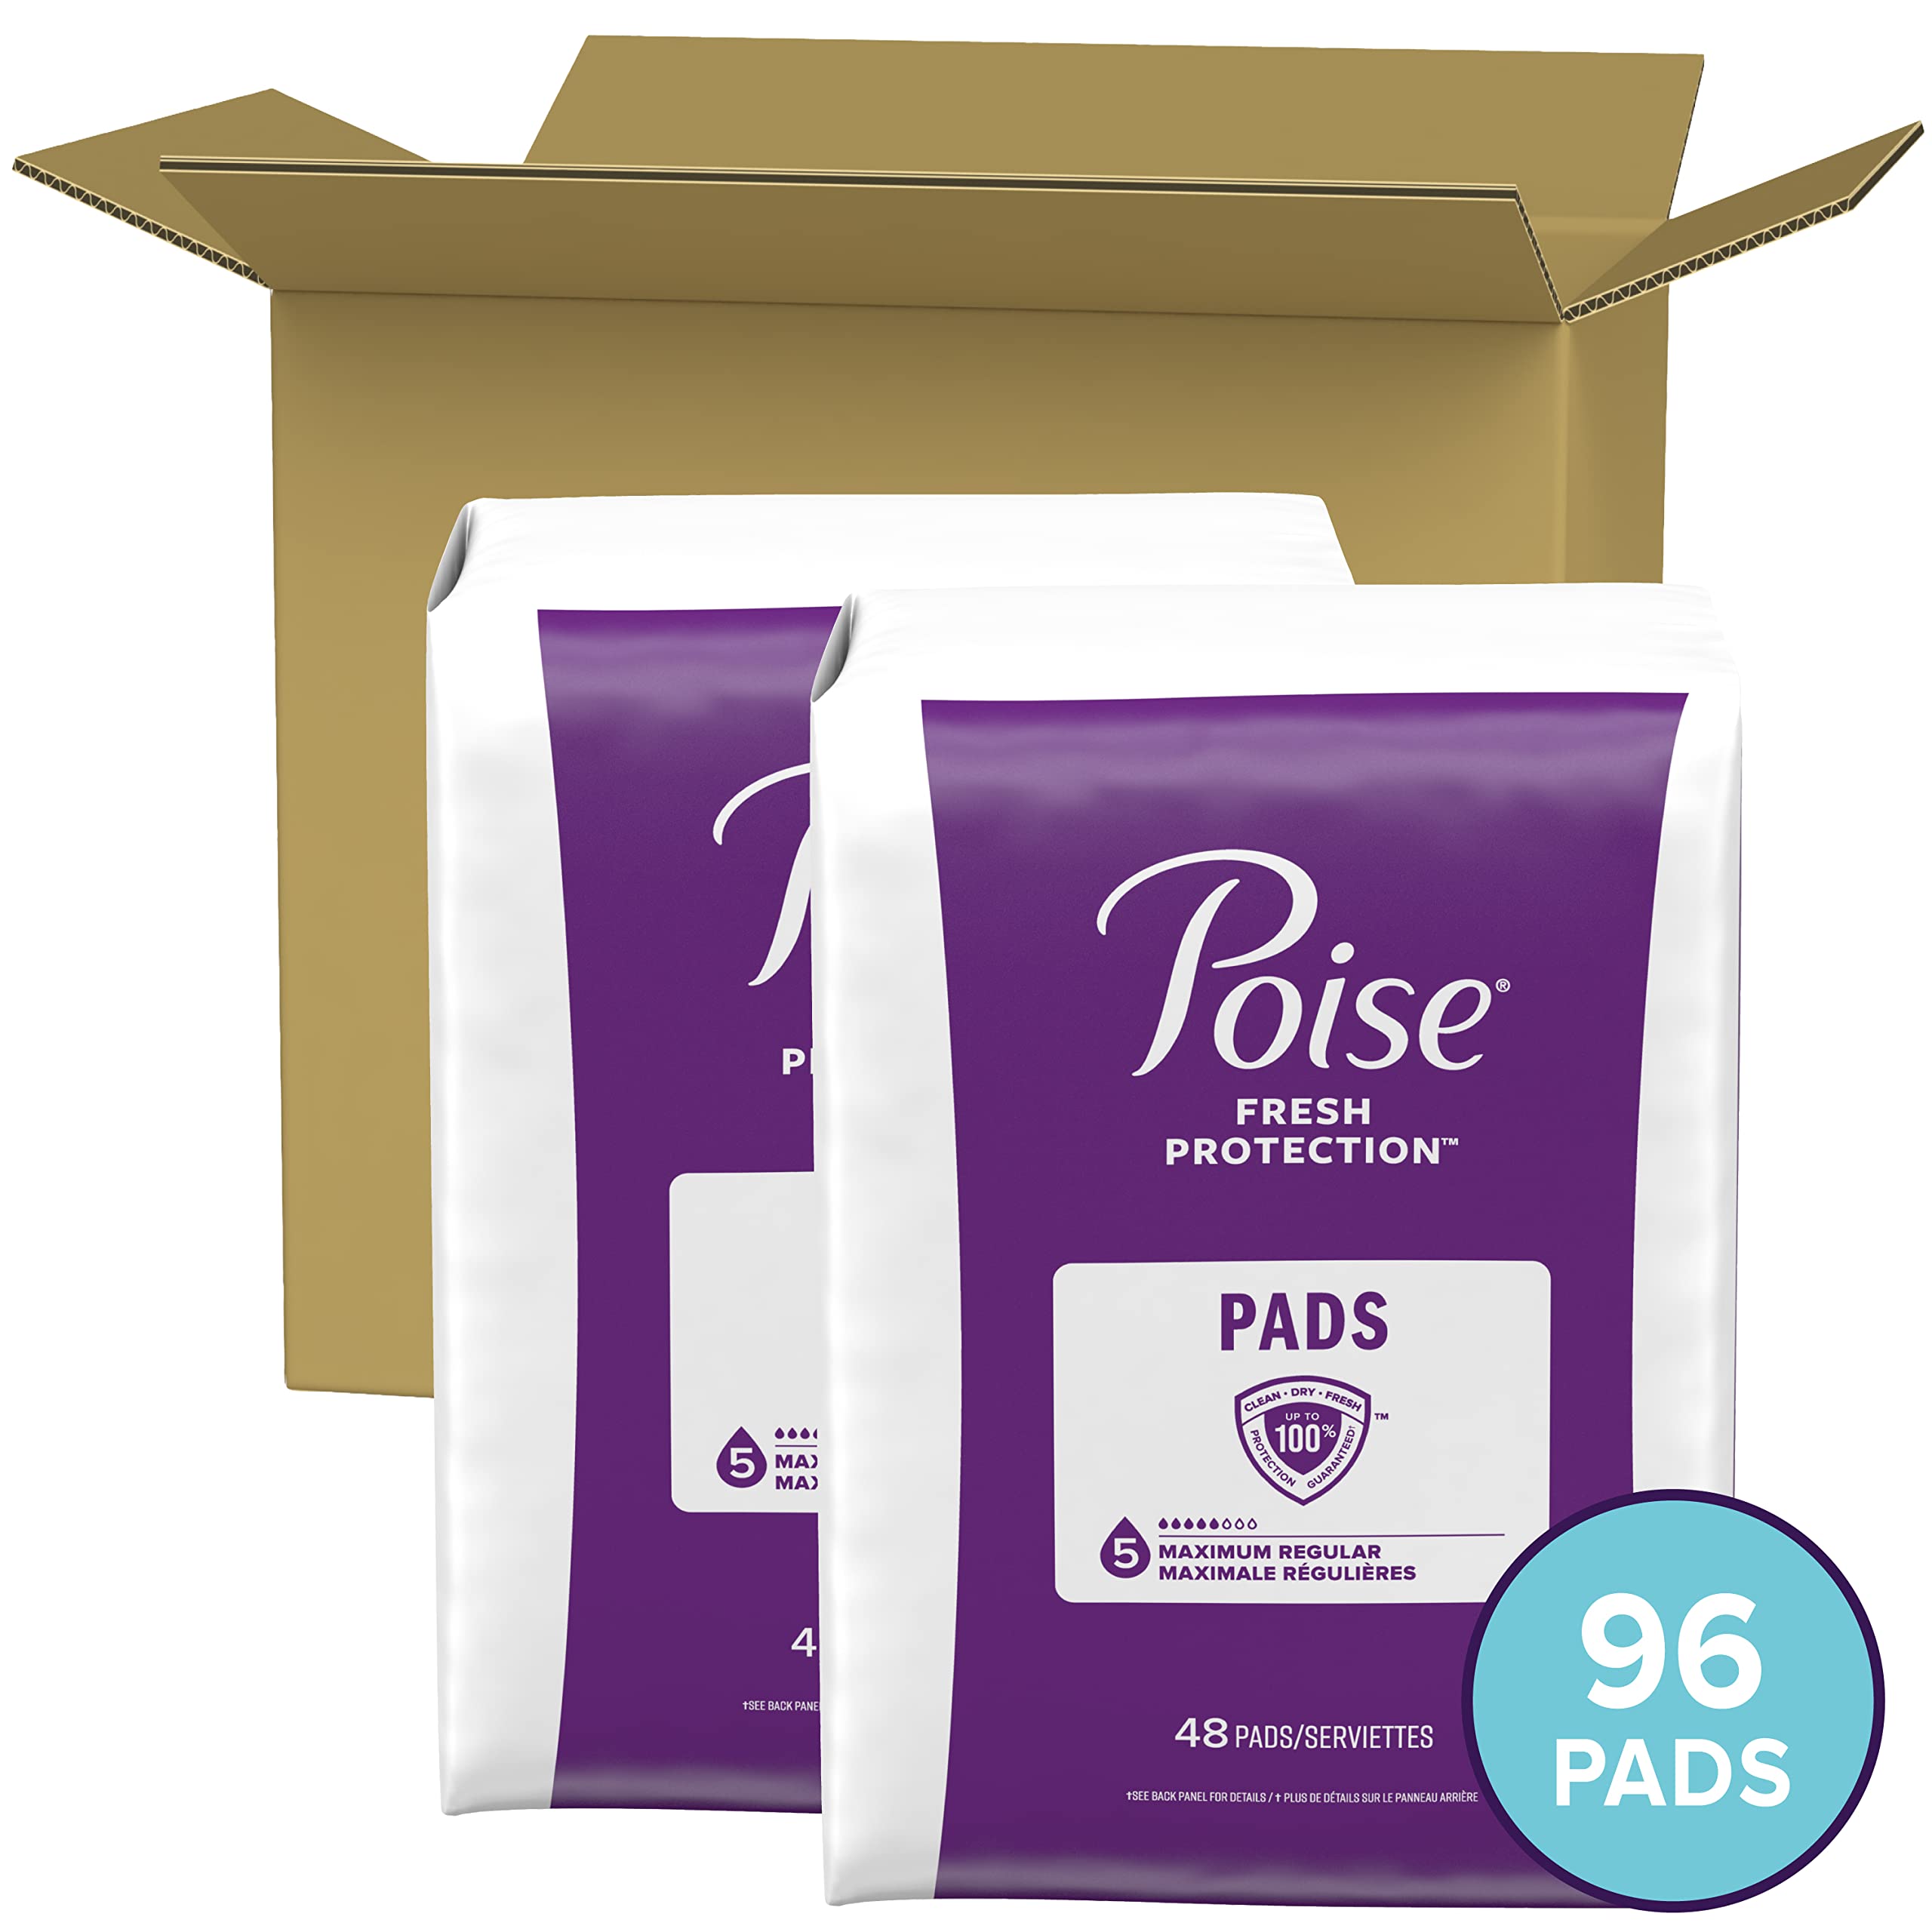 Poise Incontinence Pads & Postpartum Incontinence Pads, 5 Drop Maximum Absorbency, Regular Length, 96 Count, Packaging May Vary